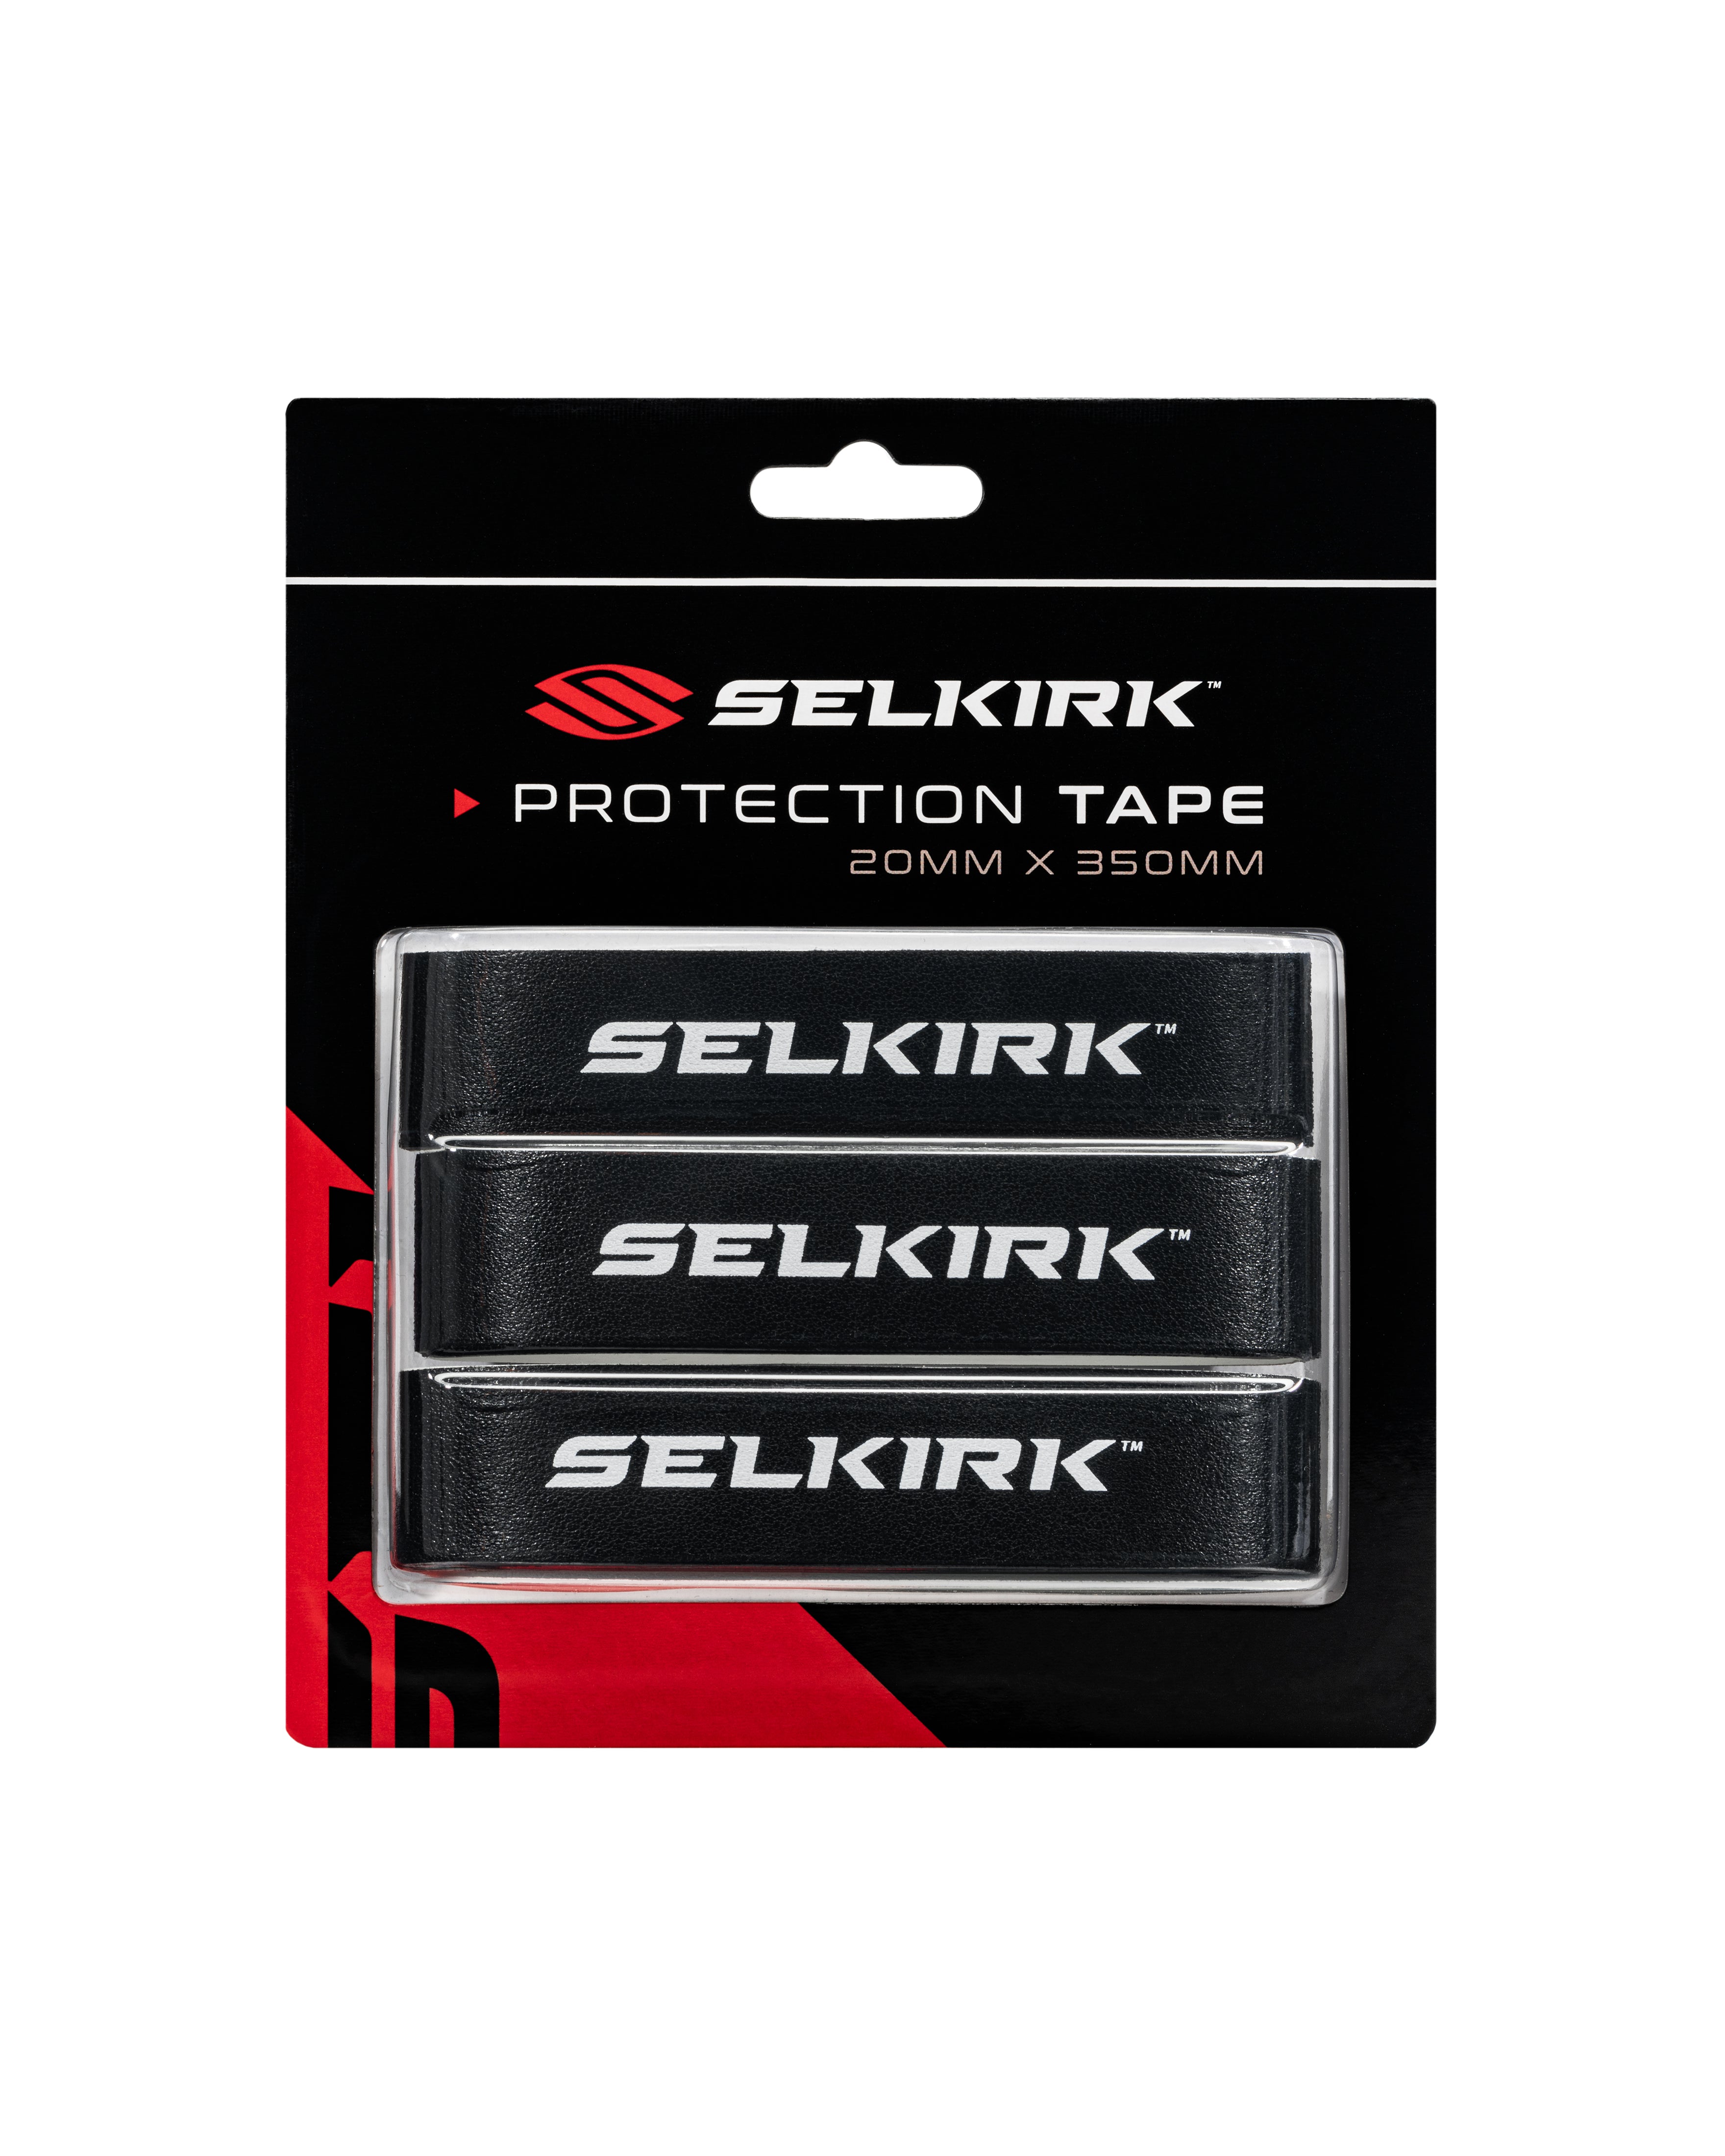 Free Gift - Selkirk Protective Edge Guard Tape - 1 Piece